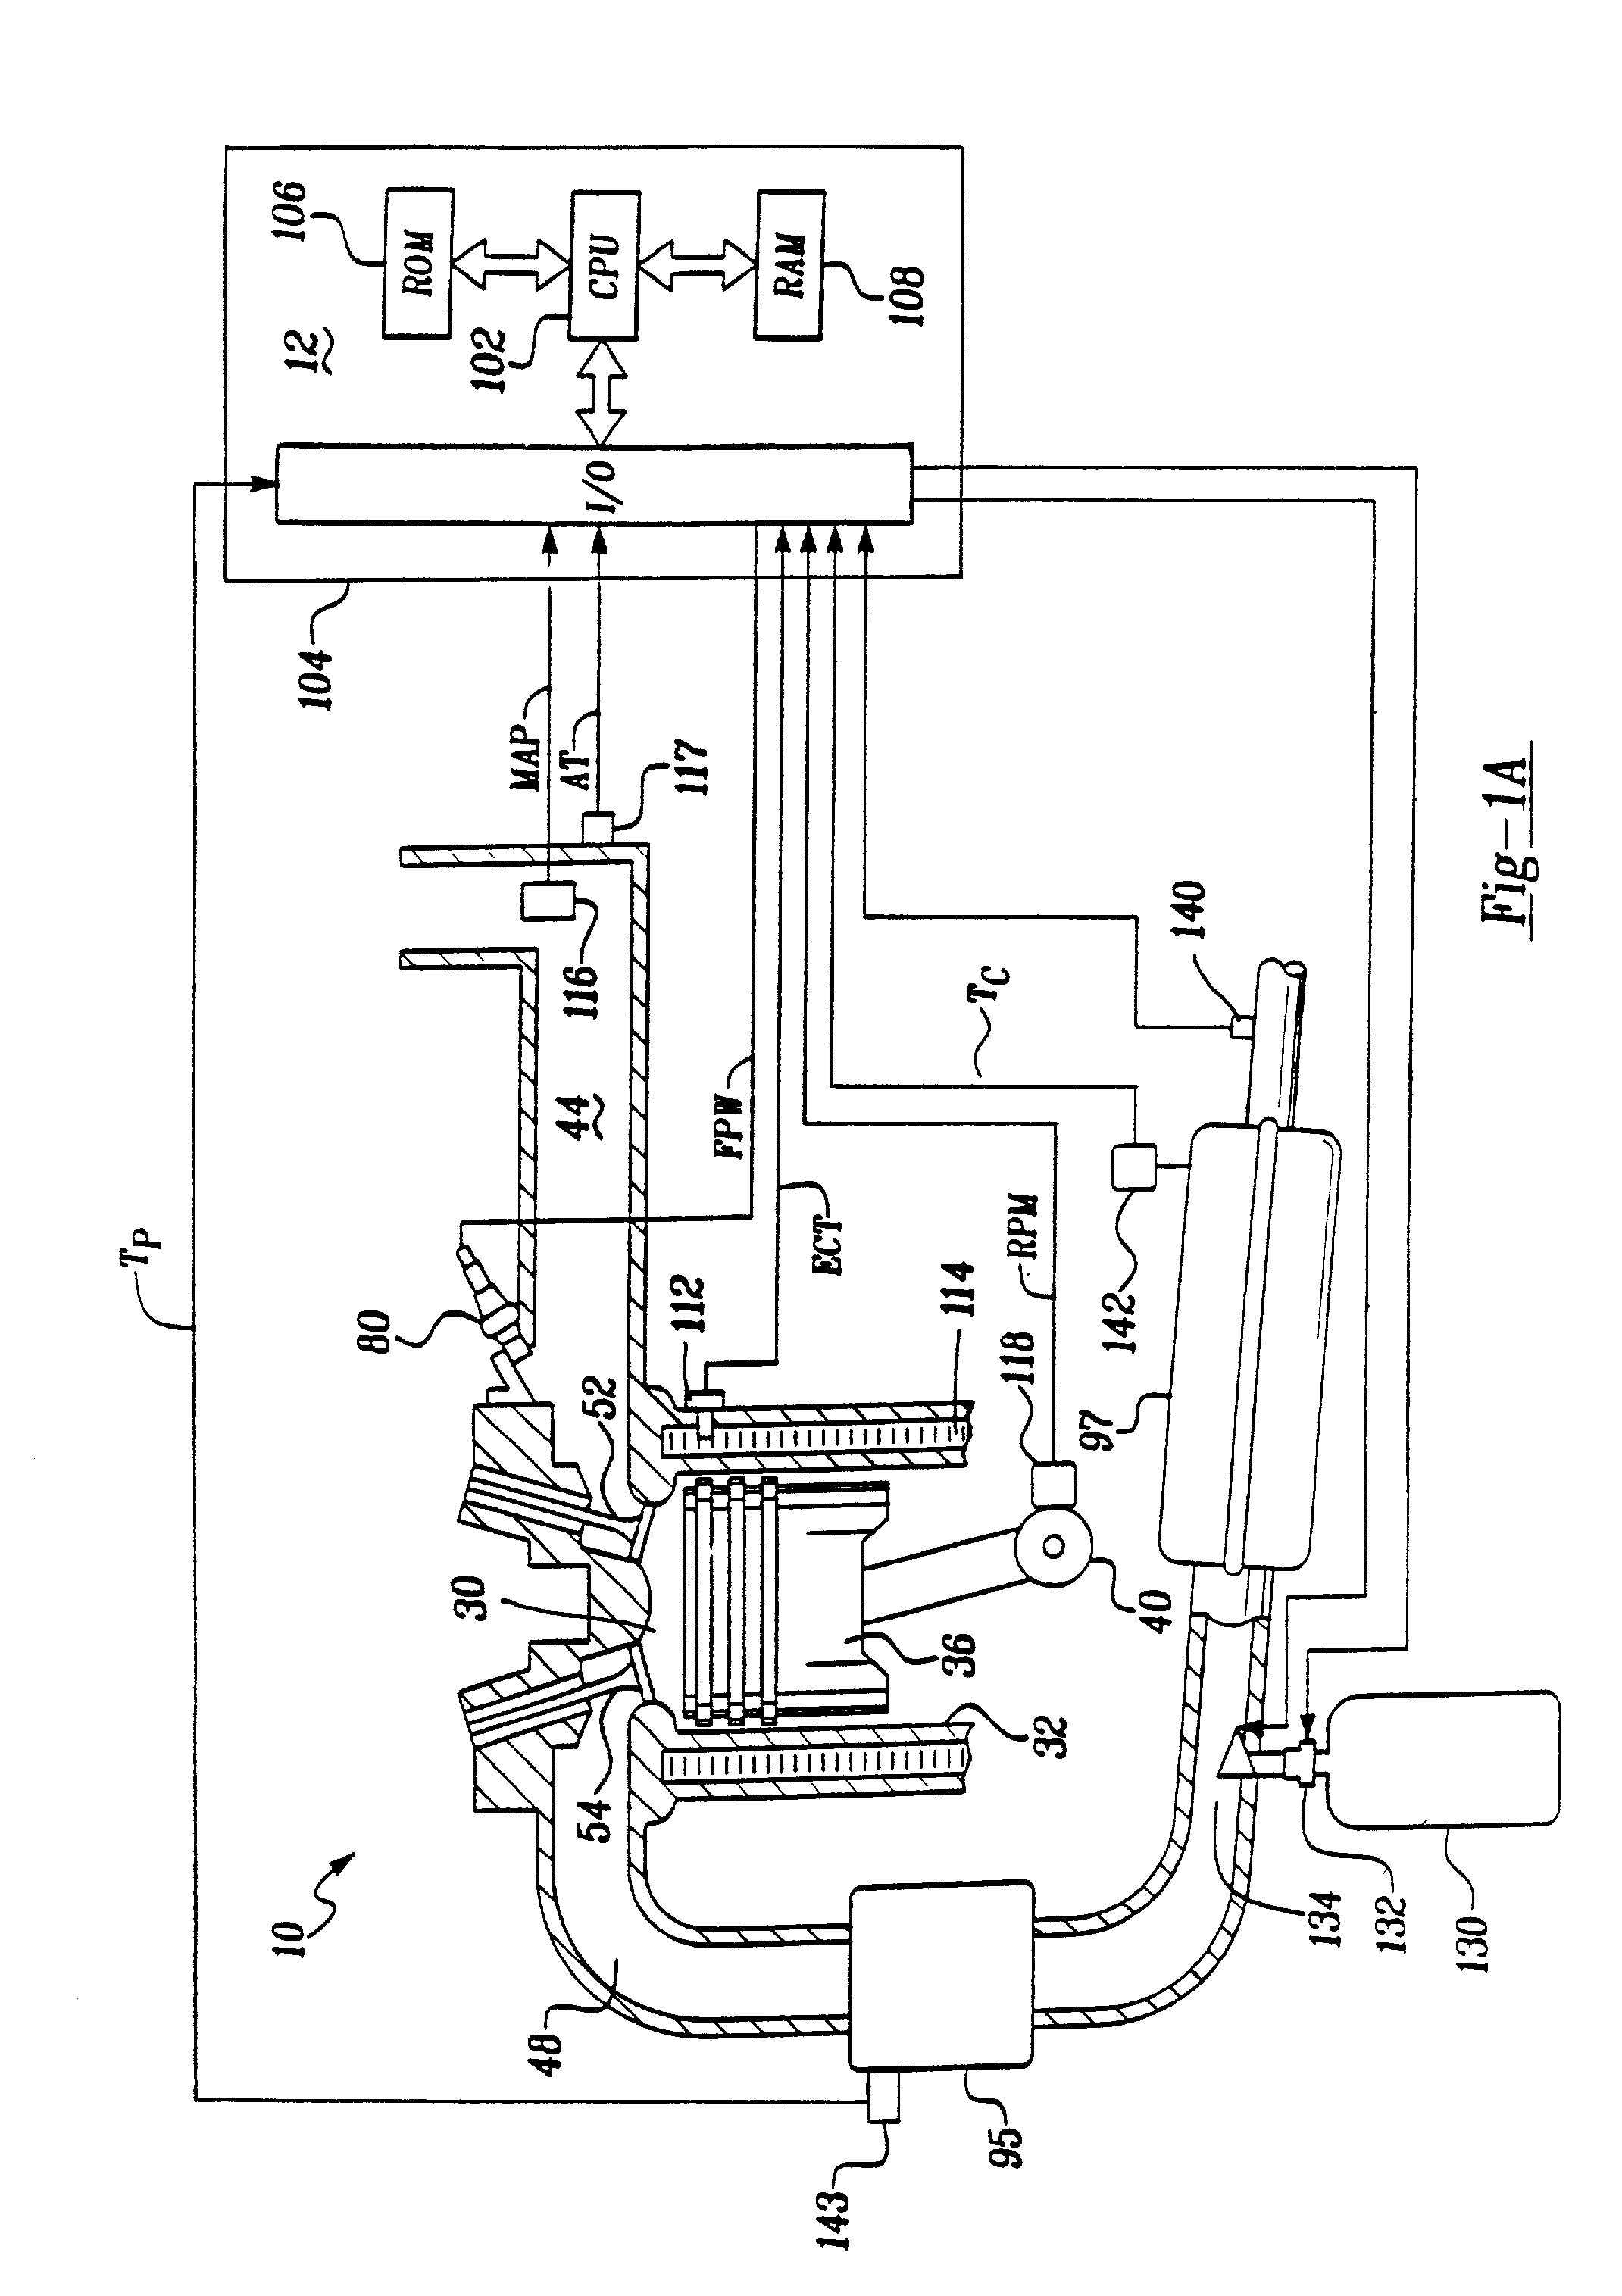 Engine control system and method with lean catalyst and particulate filter